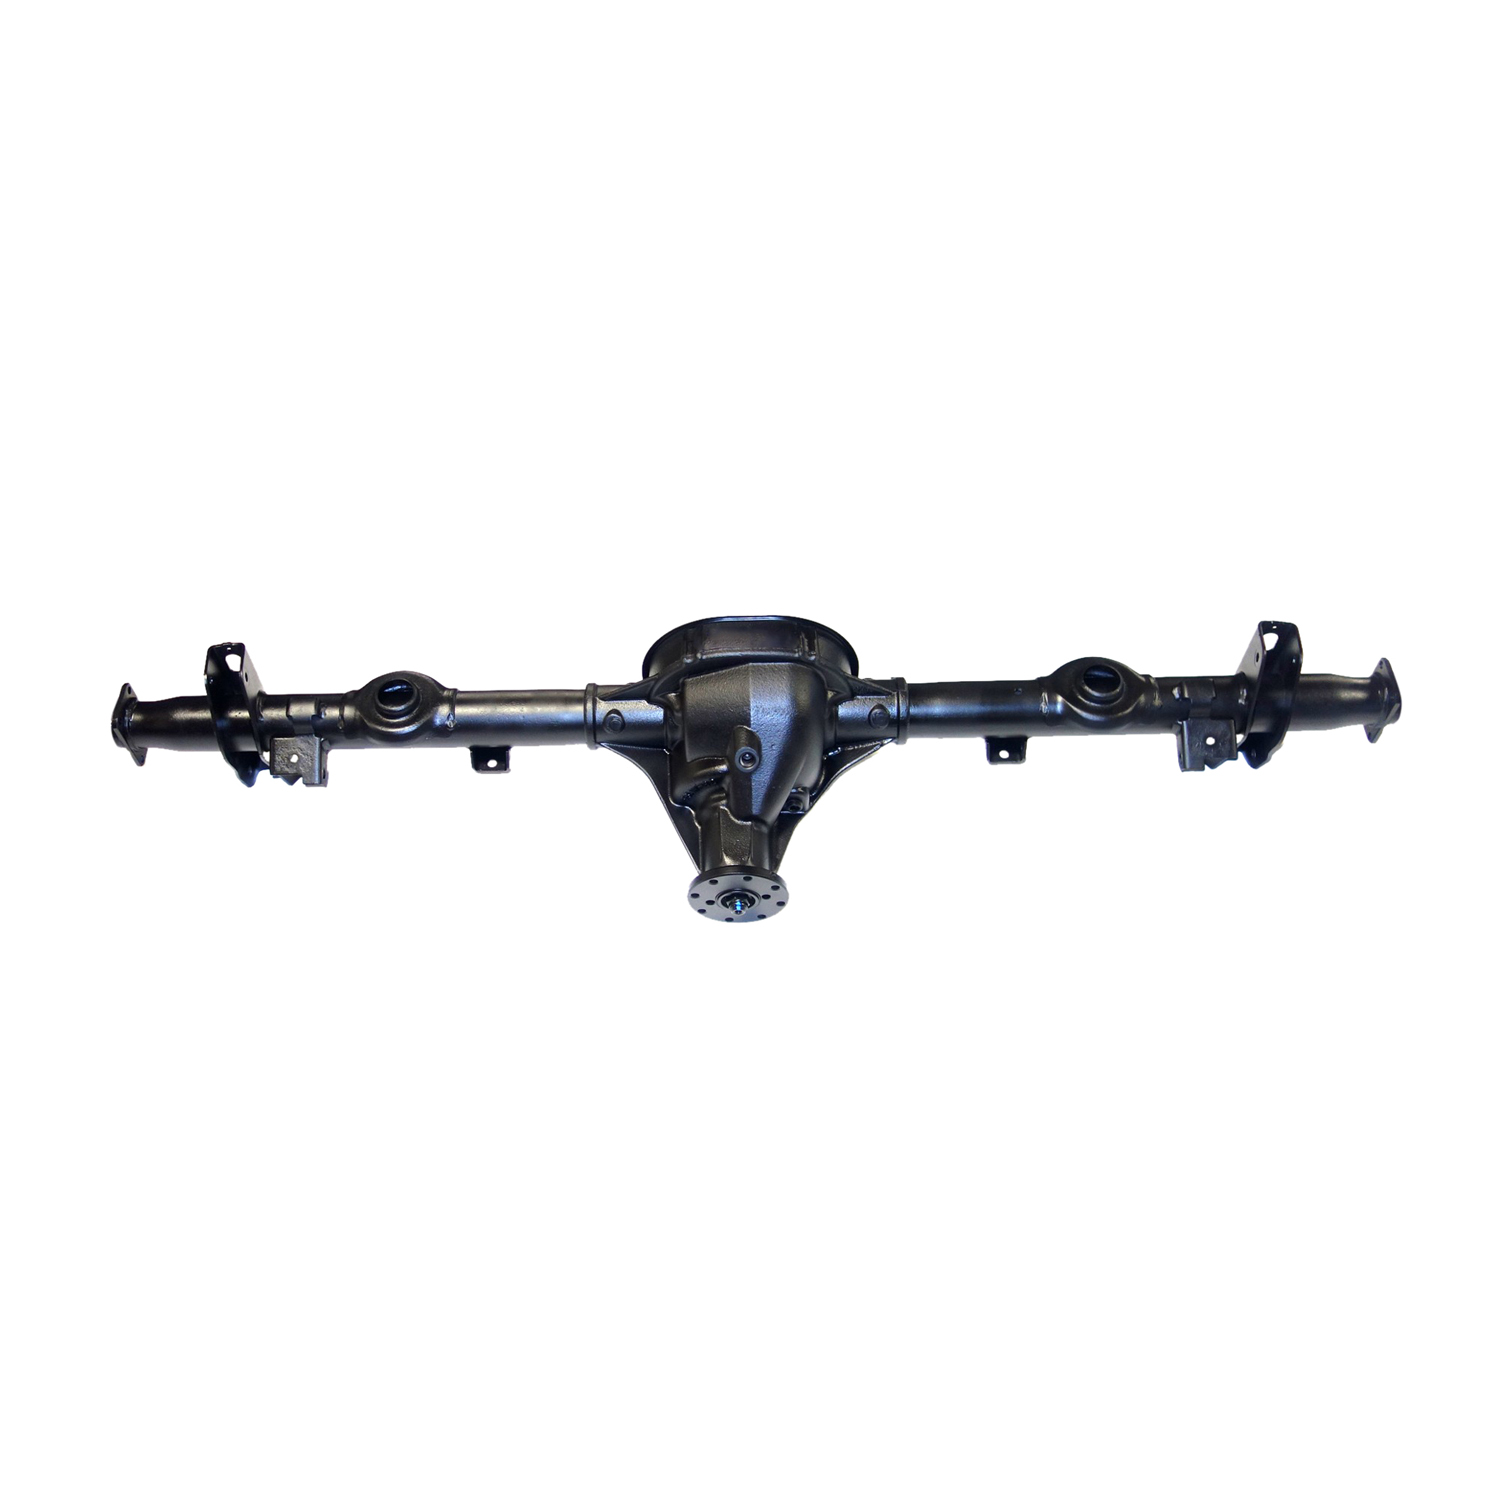 Remanufactured Axle Assy 8.8" 1998-00 Crown Vic, W/O ABS W/O H&ling Package, 3.08 , Posi